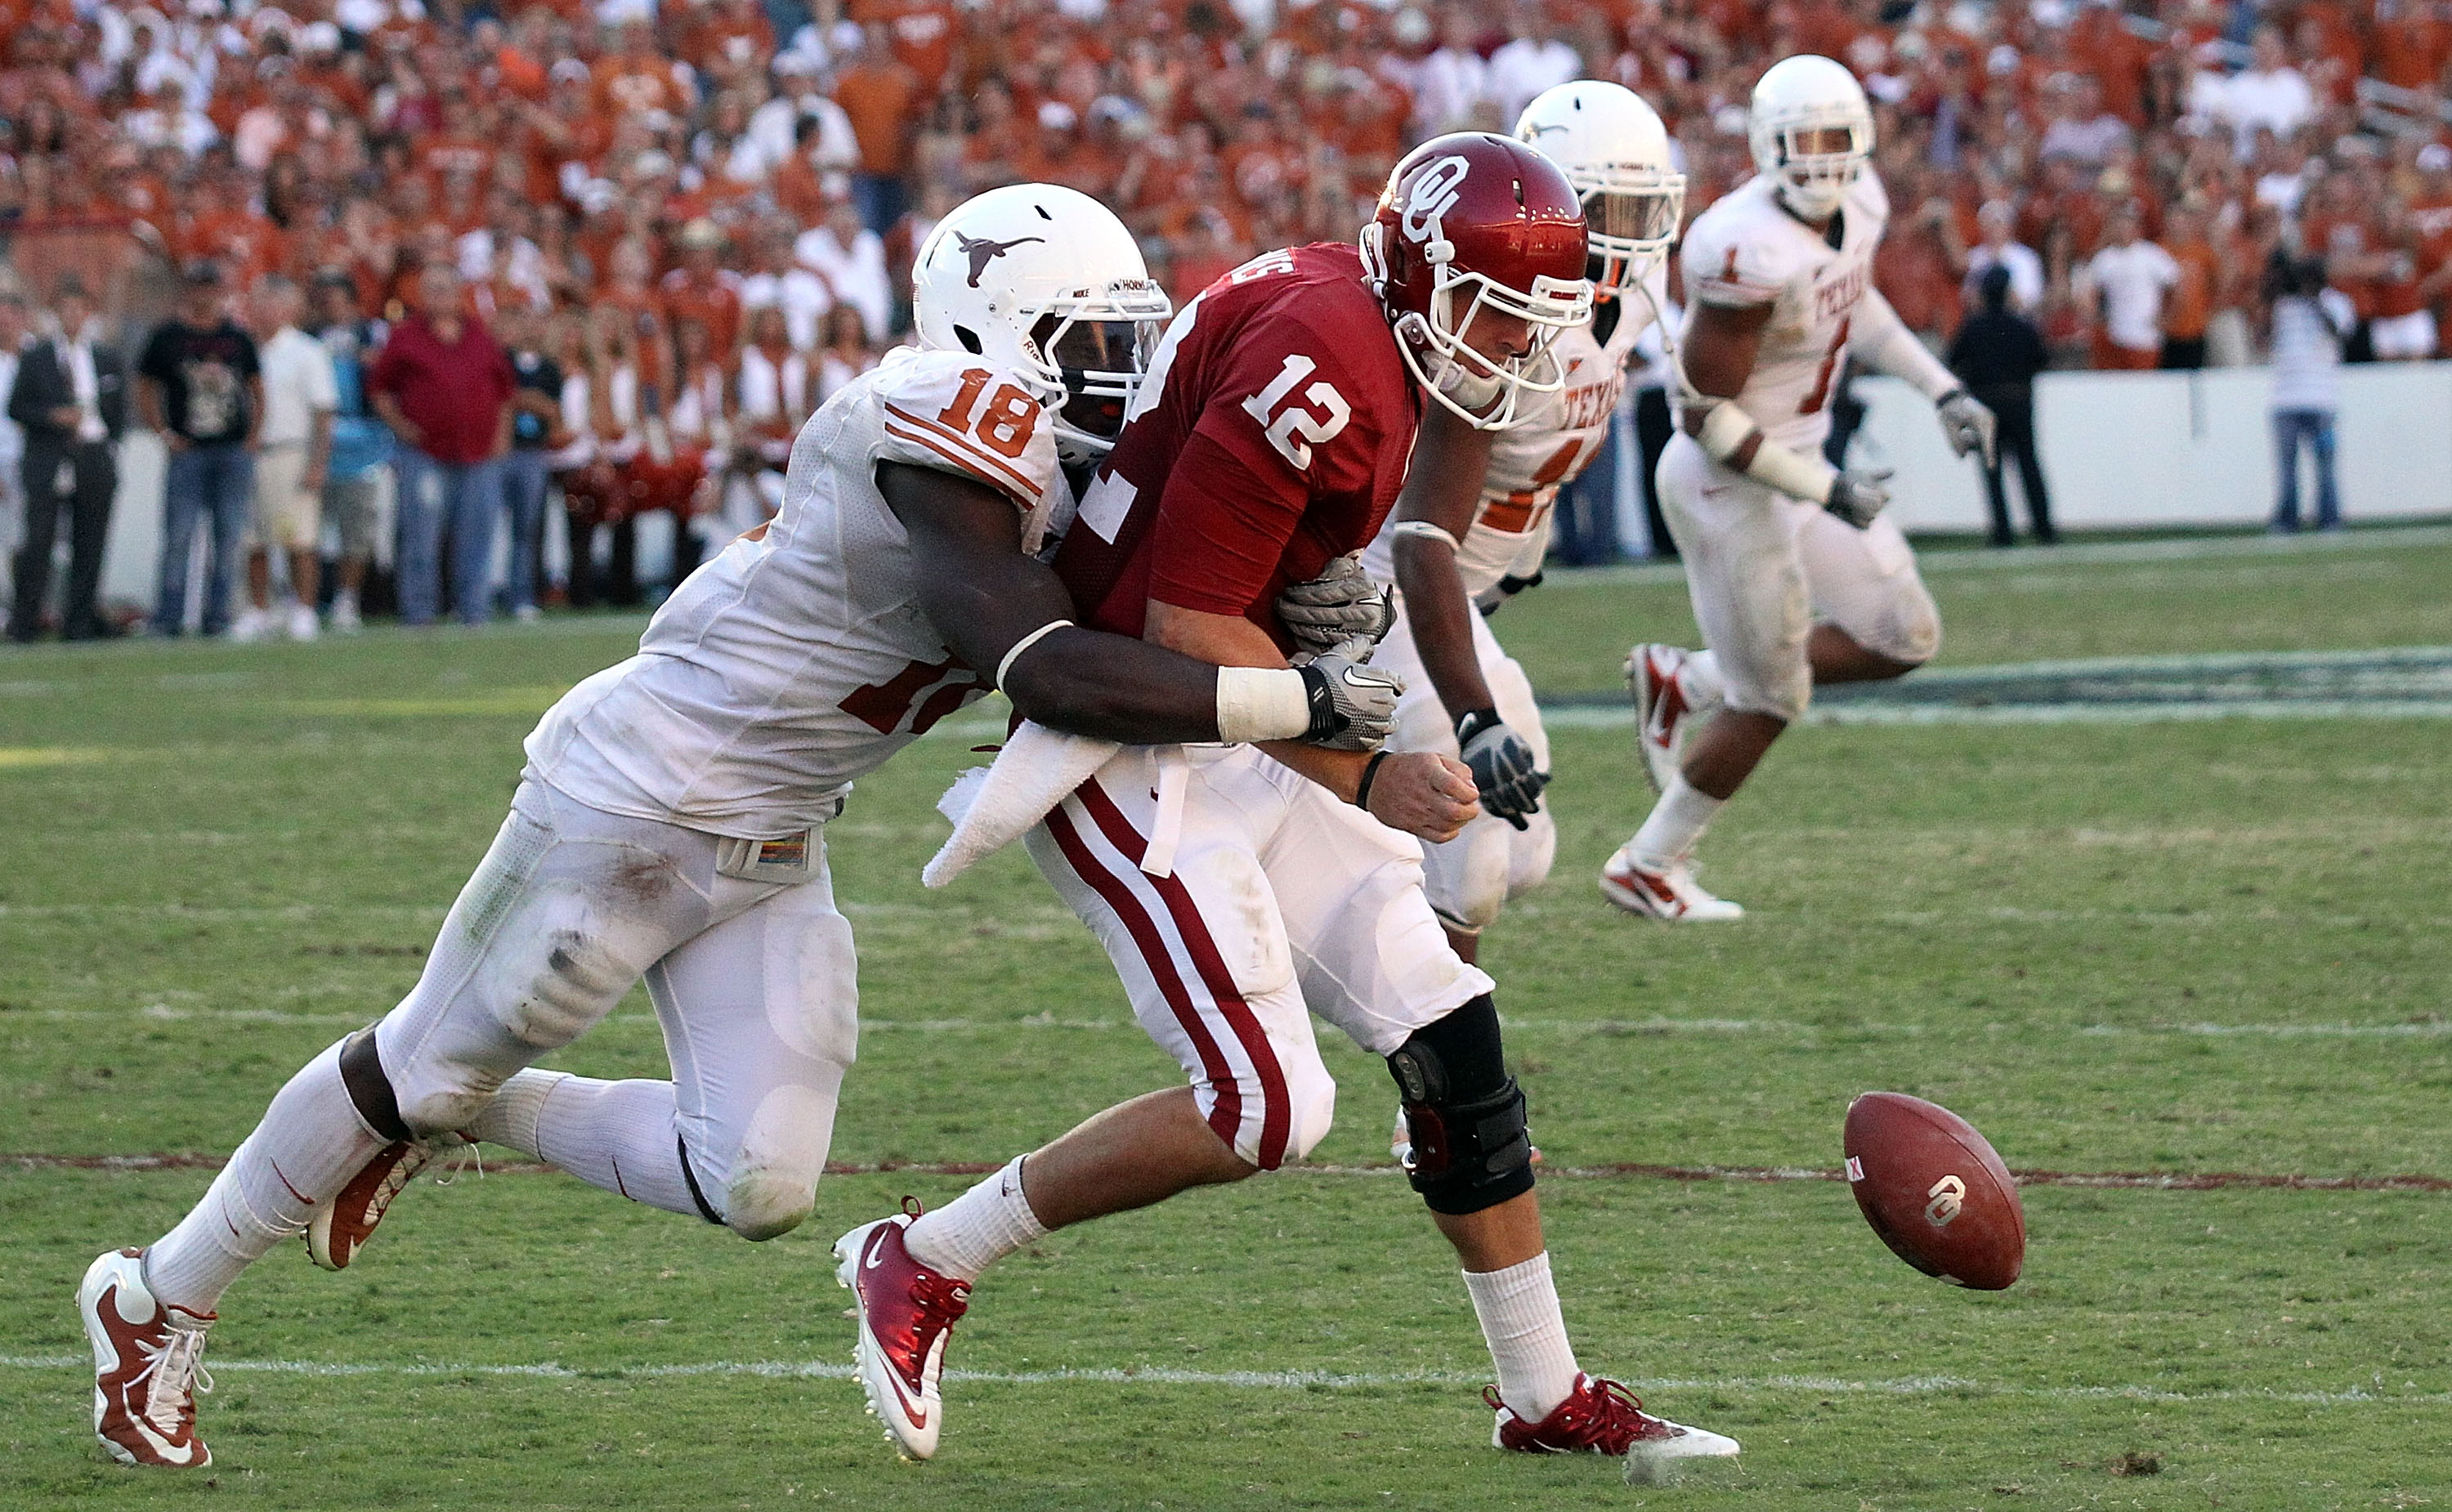 DALLAS - OCTOBER 02:  Quarterback Landry Jones #12 of the Oklahoma Sooners fumbles the ball against D.J. Grant #18 of the Texas Longhorns in the fourth quarter at the Cotton Bowl on October 2, 2010 in Dallas, Texas.  (Photo by Ronald Martinez/Getty Images